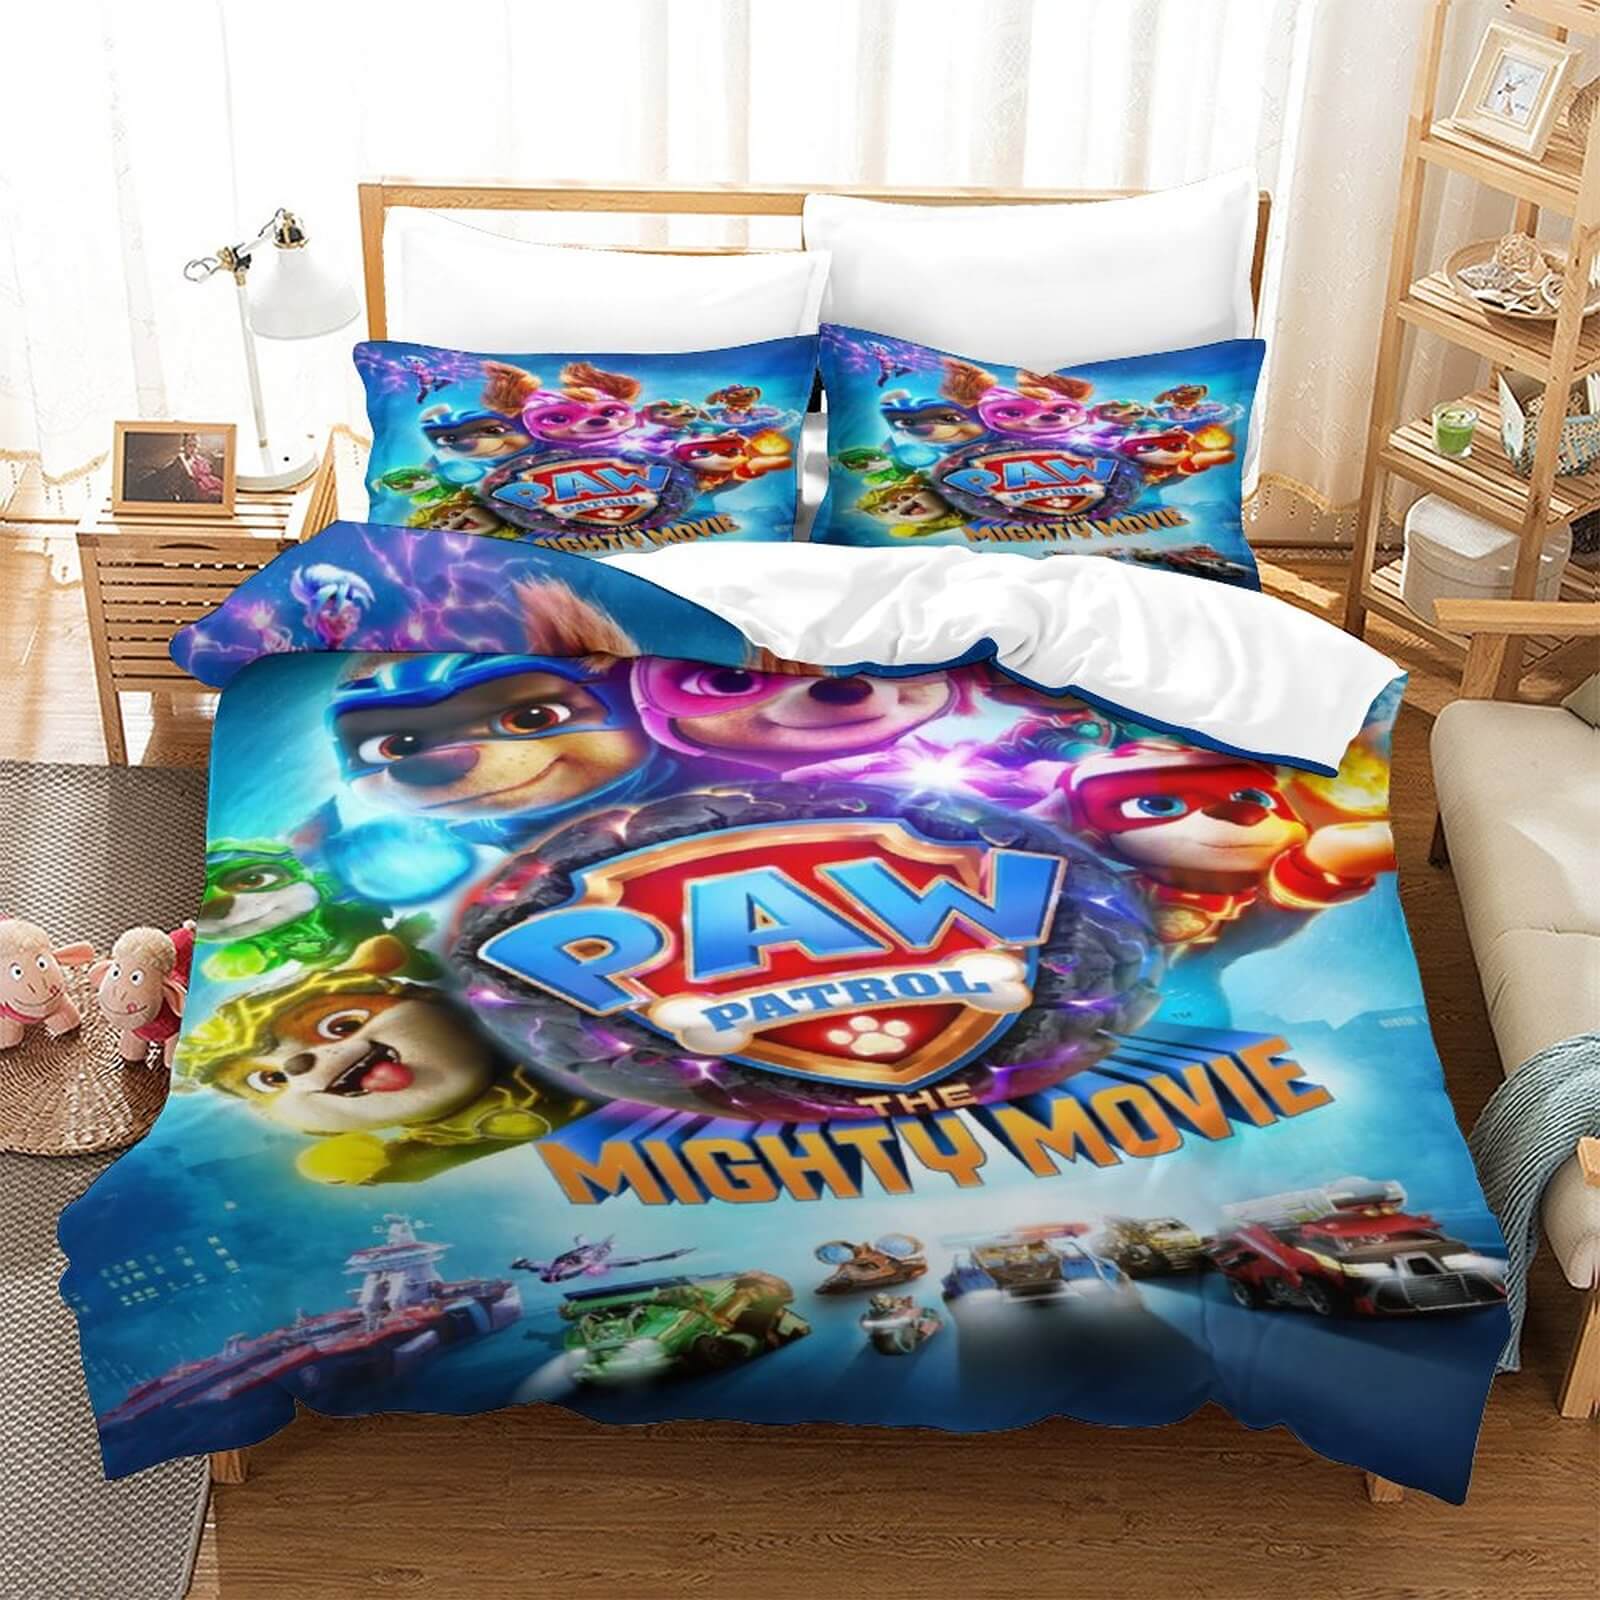 2024 NEW PAW Patrol The Mighty Movie Bedding Set Quilt Duvet Cover Without Filler